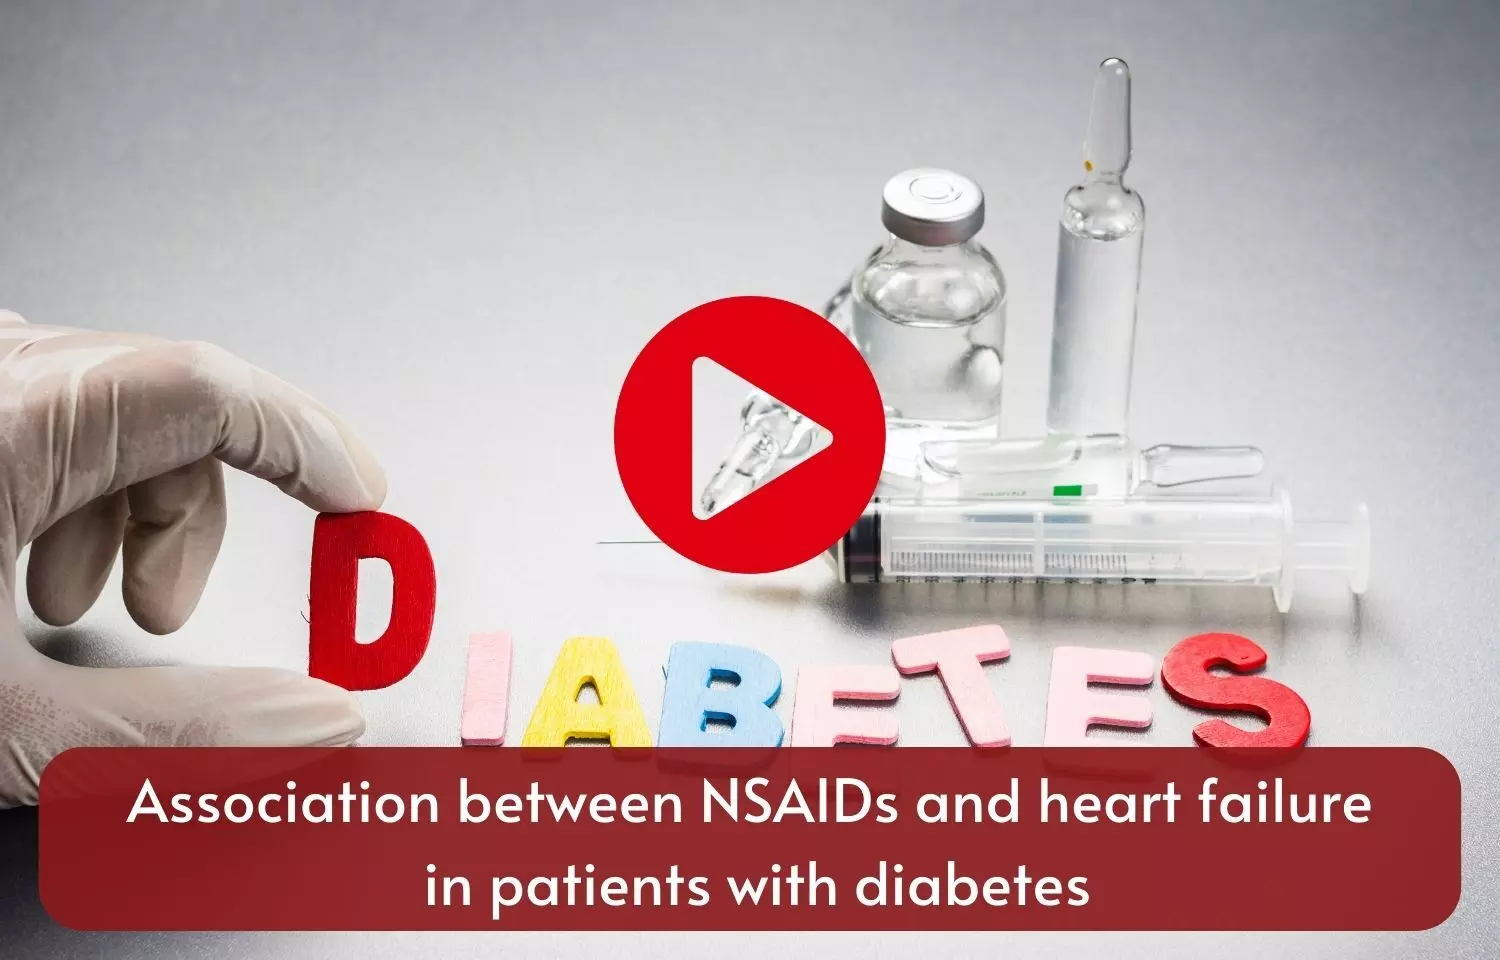 Association between NSAIDs and heart failure in patients with diabetes